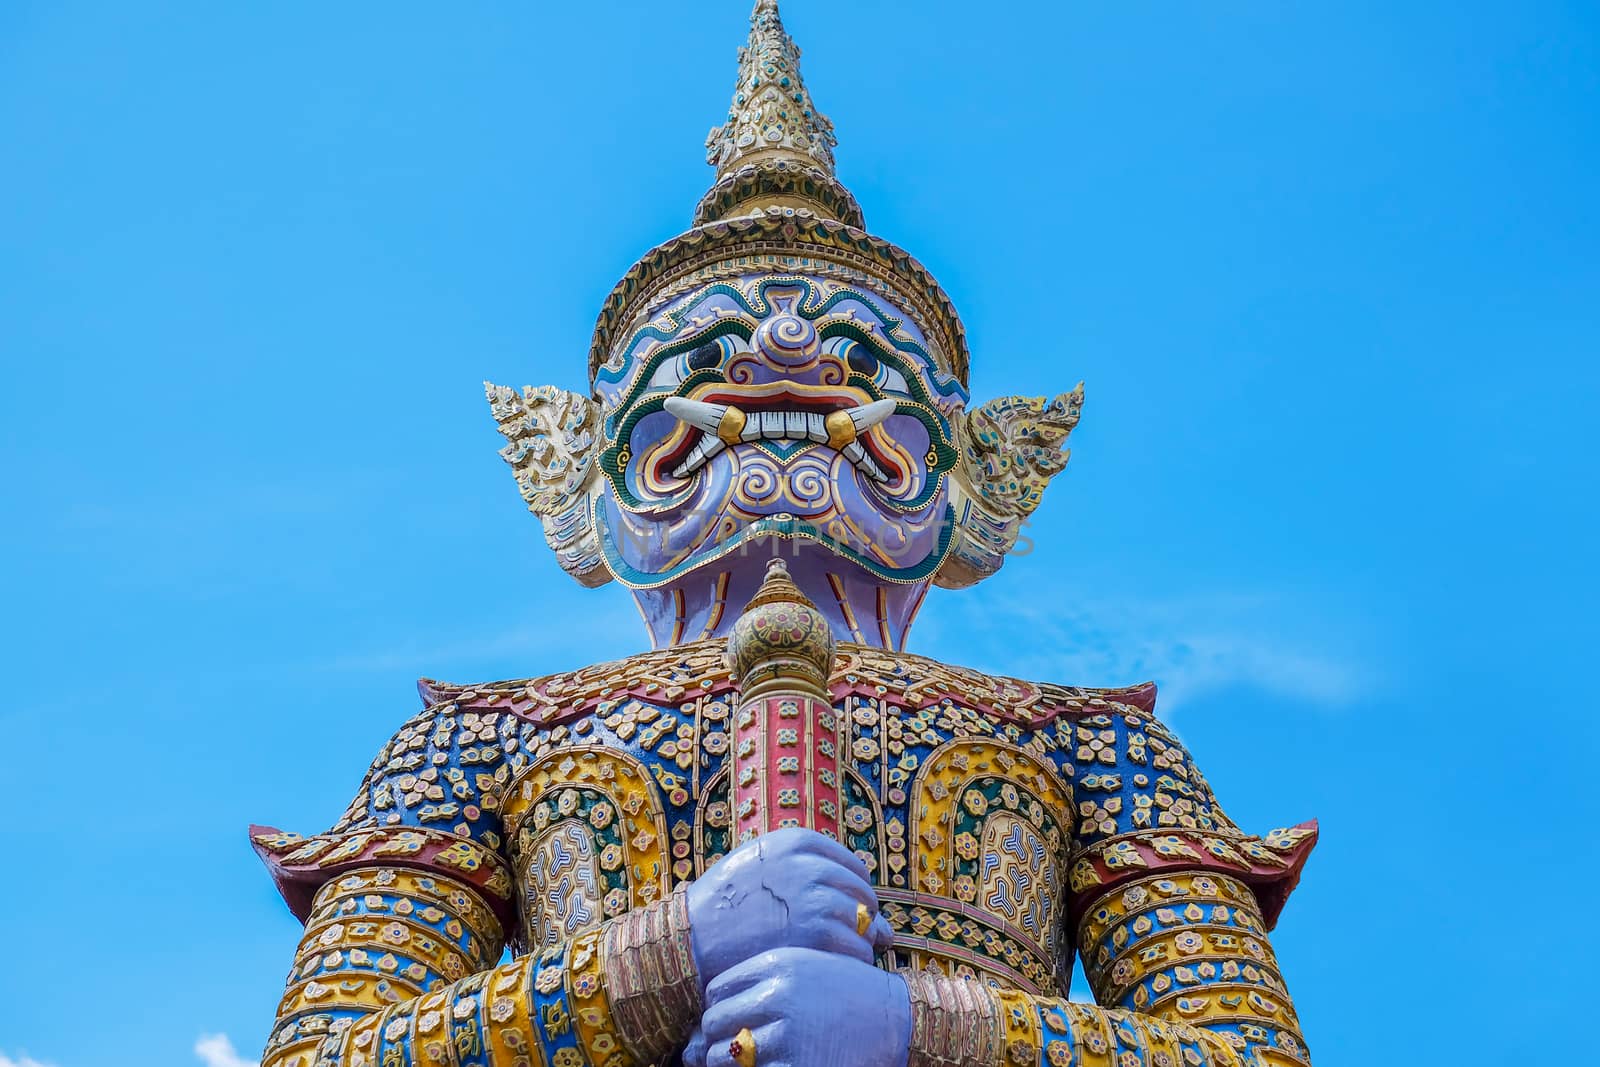 Purple Giant in Thailand on Blue sky